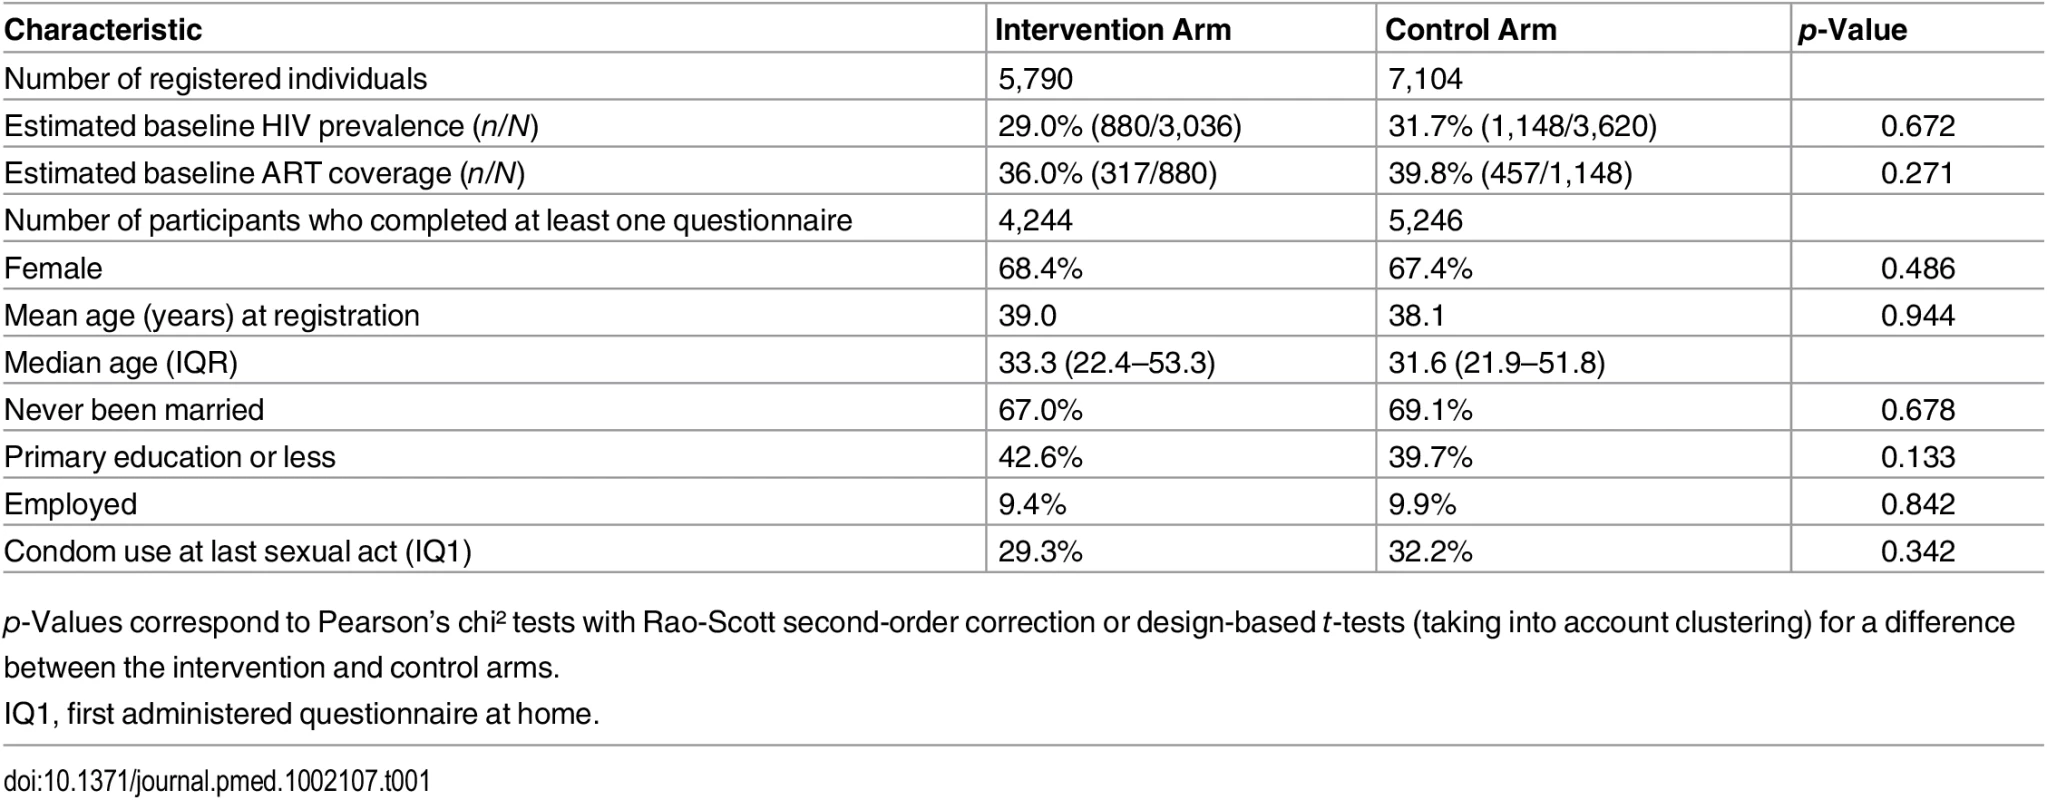 Baseline characteristics of participants in intervention and control arms, first phase of the TasP ANRS 12249 trial, 2012–2014.